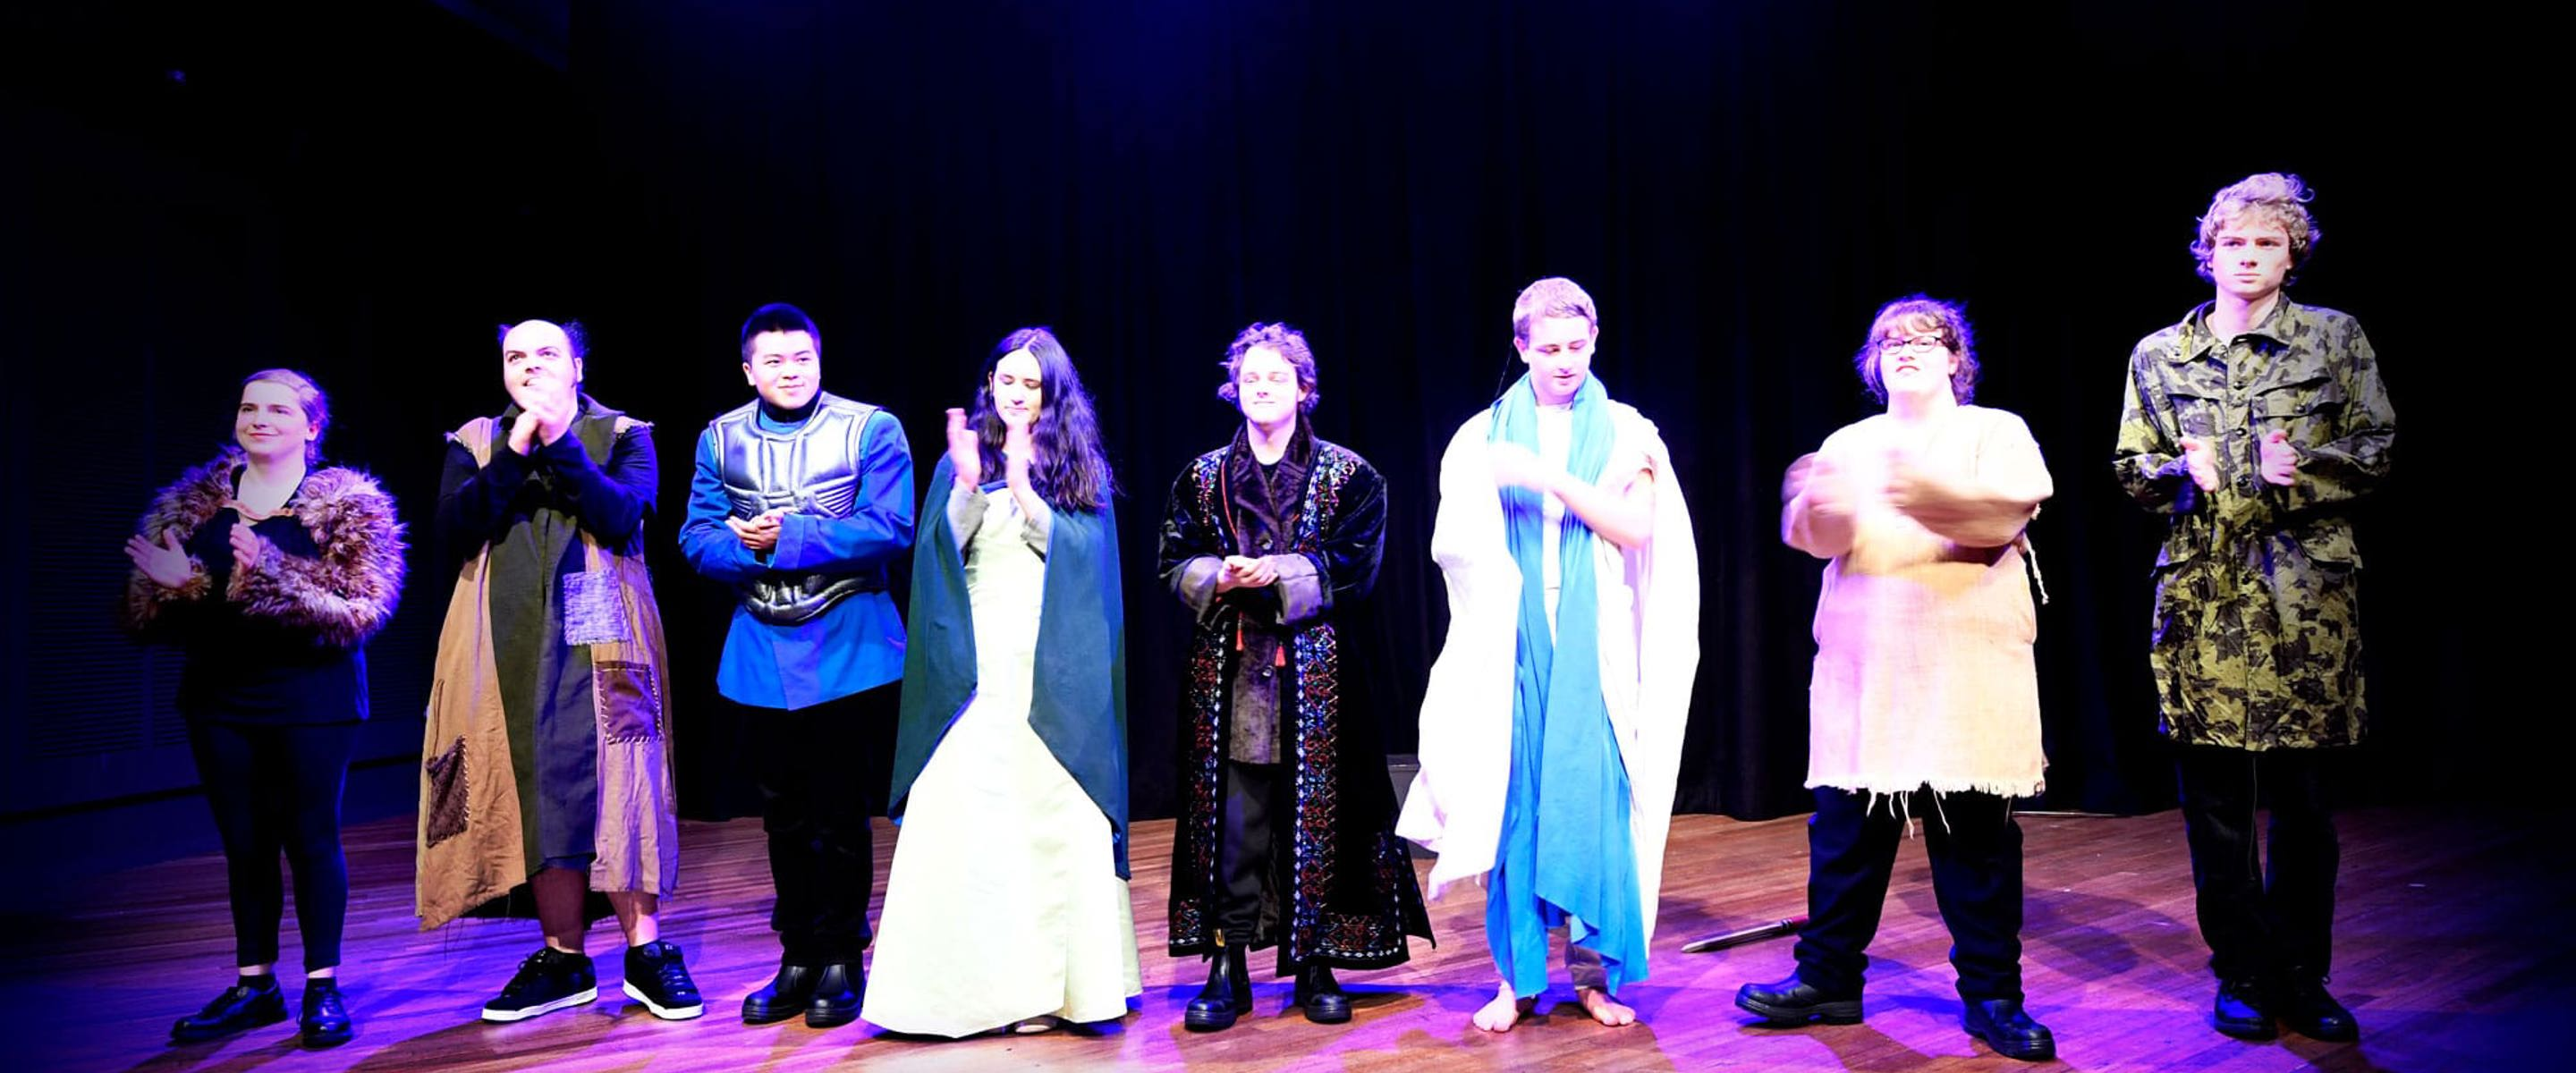 A group of people standing on a stage under theatre lights with costumes on